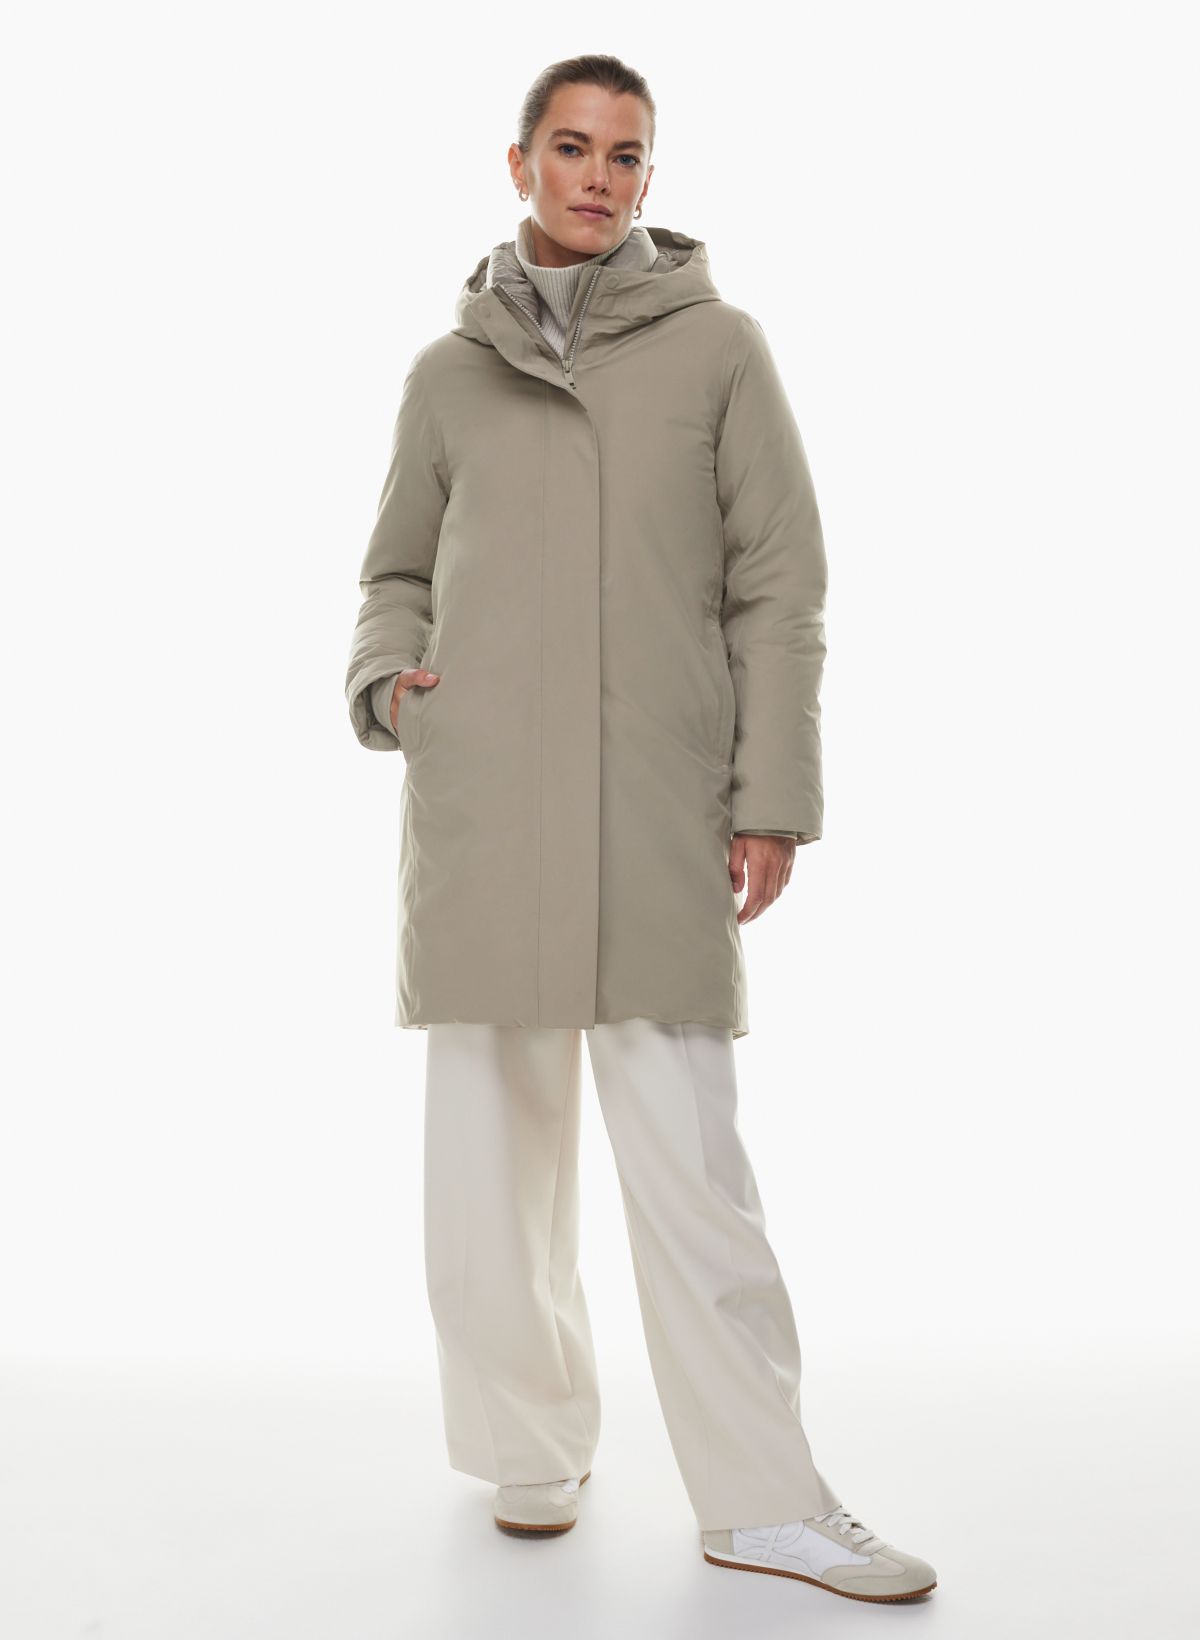 The Group by Babaton Women's Explore Parka Jacket in Matte Pearl Size Large